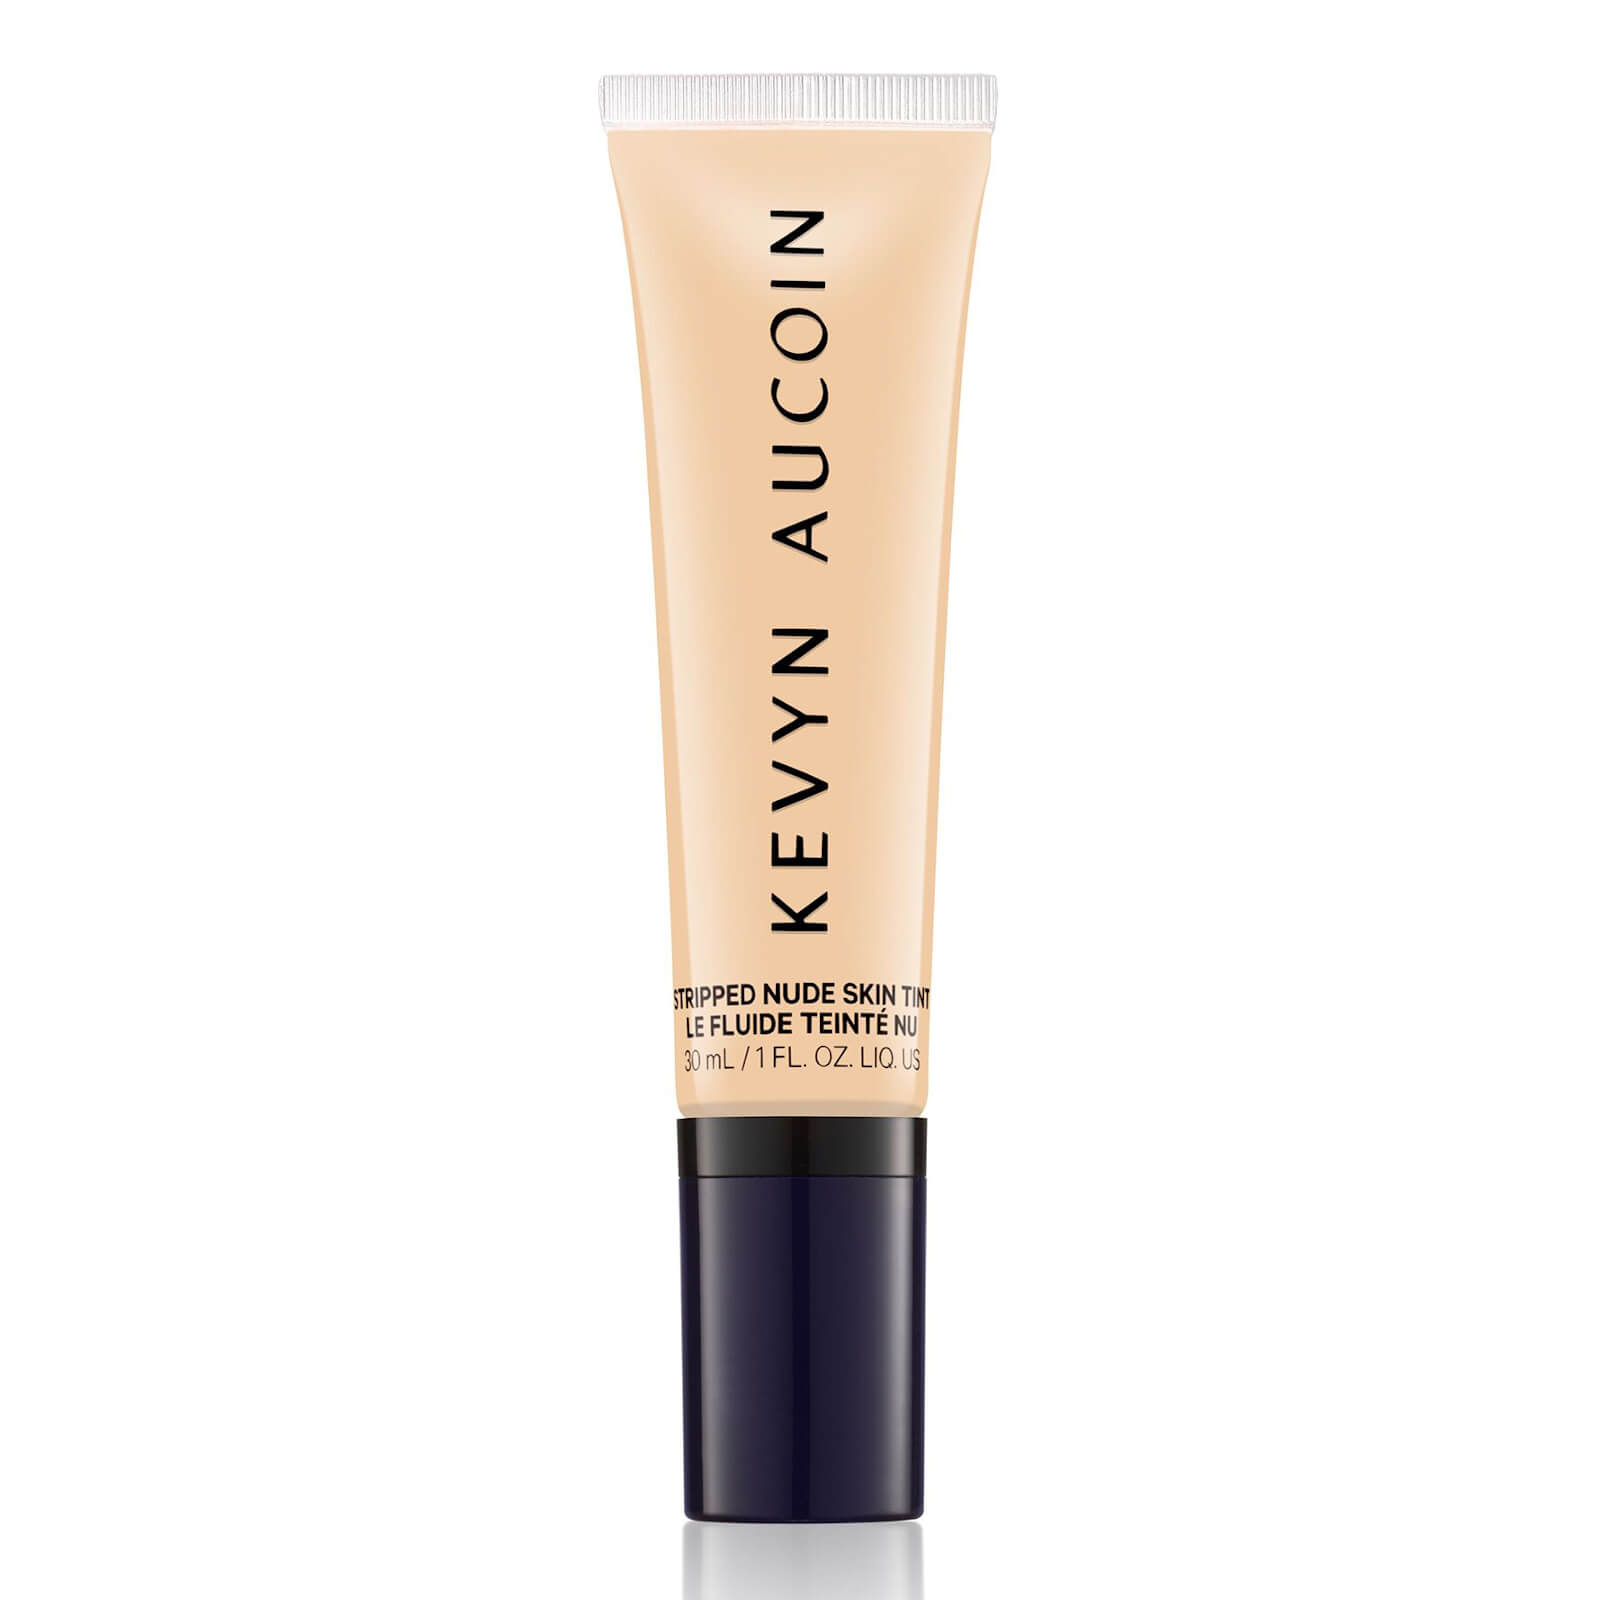 Kevyn Aucoin Stripped Nude Skin Tint (Various Shades) - Light ST 02